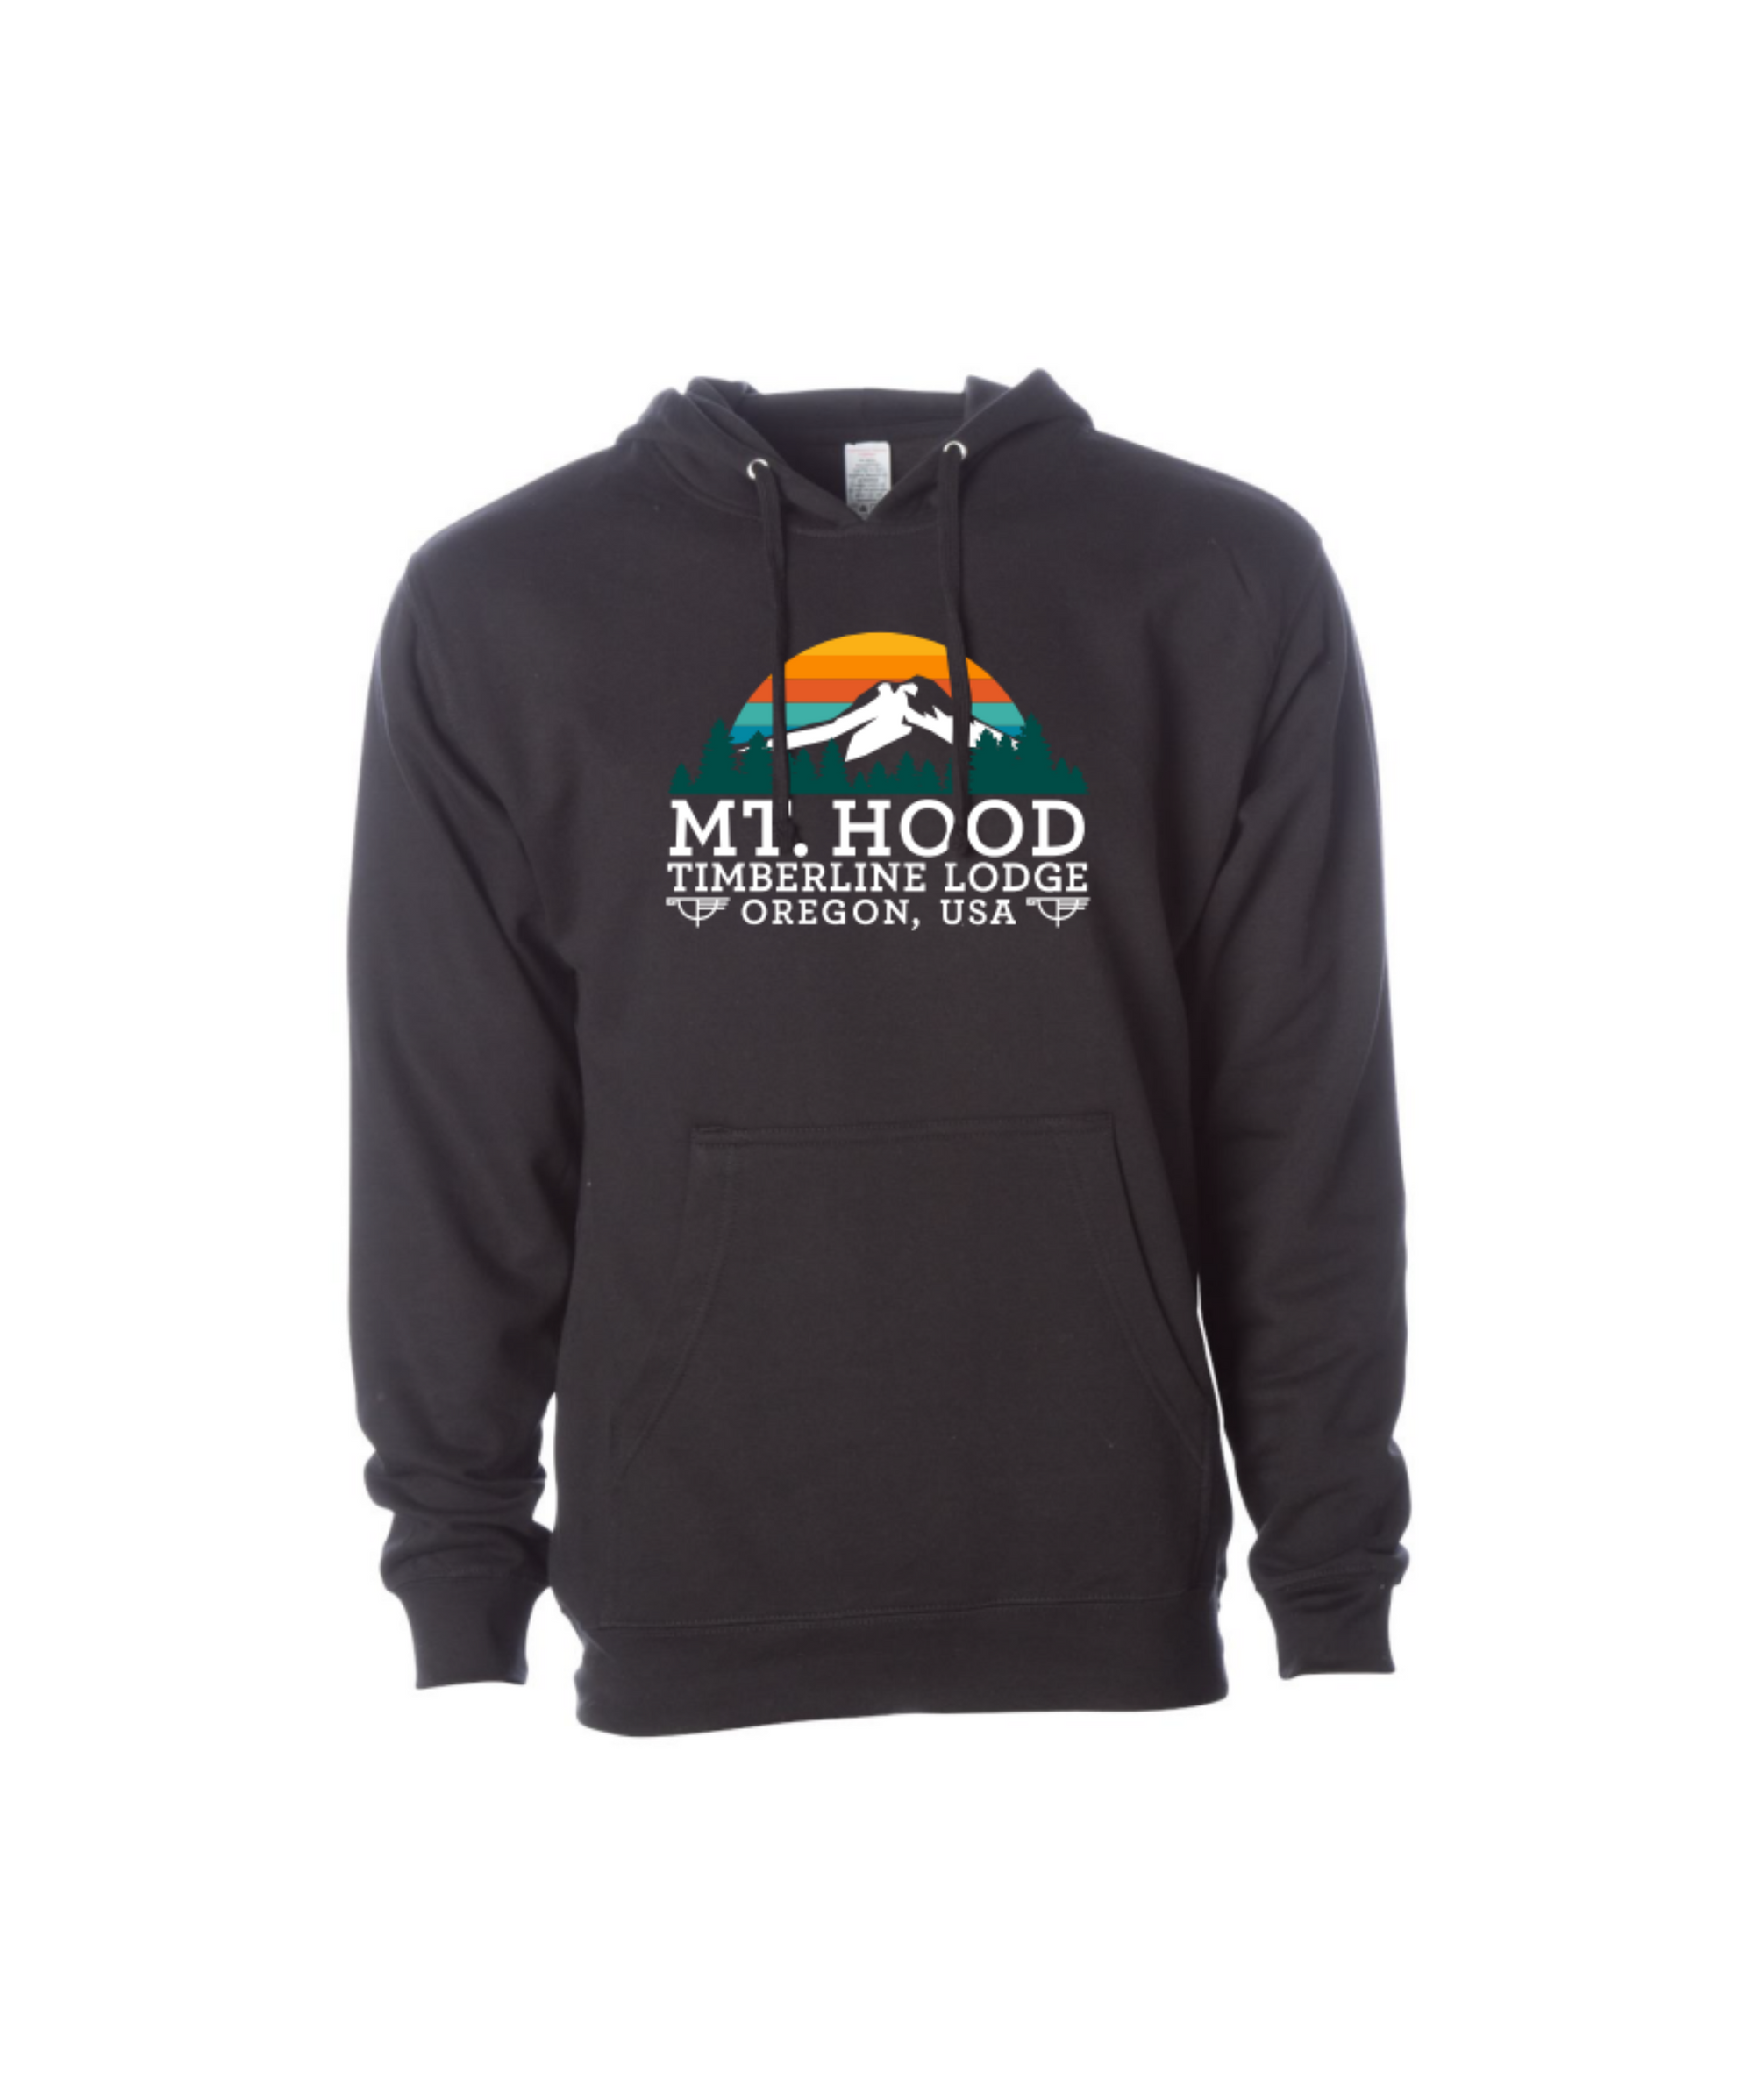 A black hoodie with a colorful graphic design featuring "Mt. Hood Timberline Lodge Oregon, USA" at **Daybreak** on the chest.